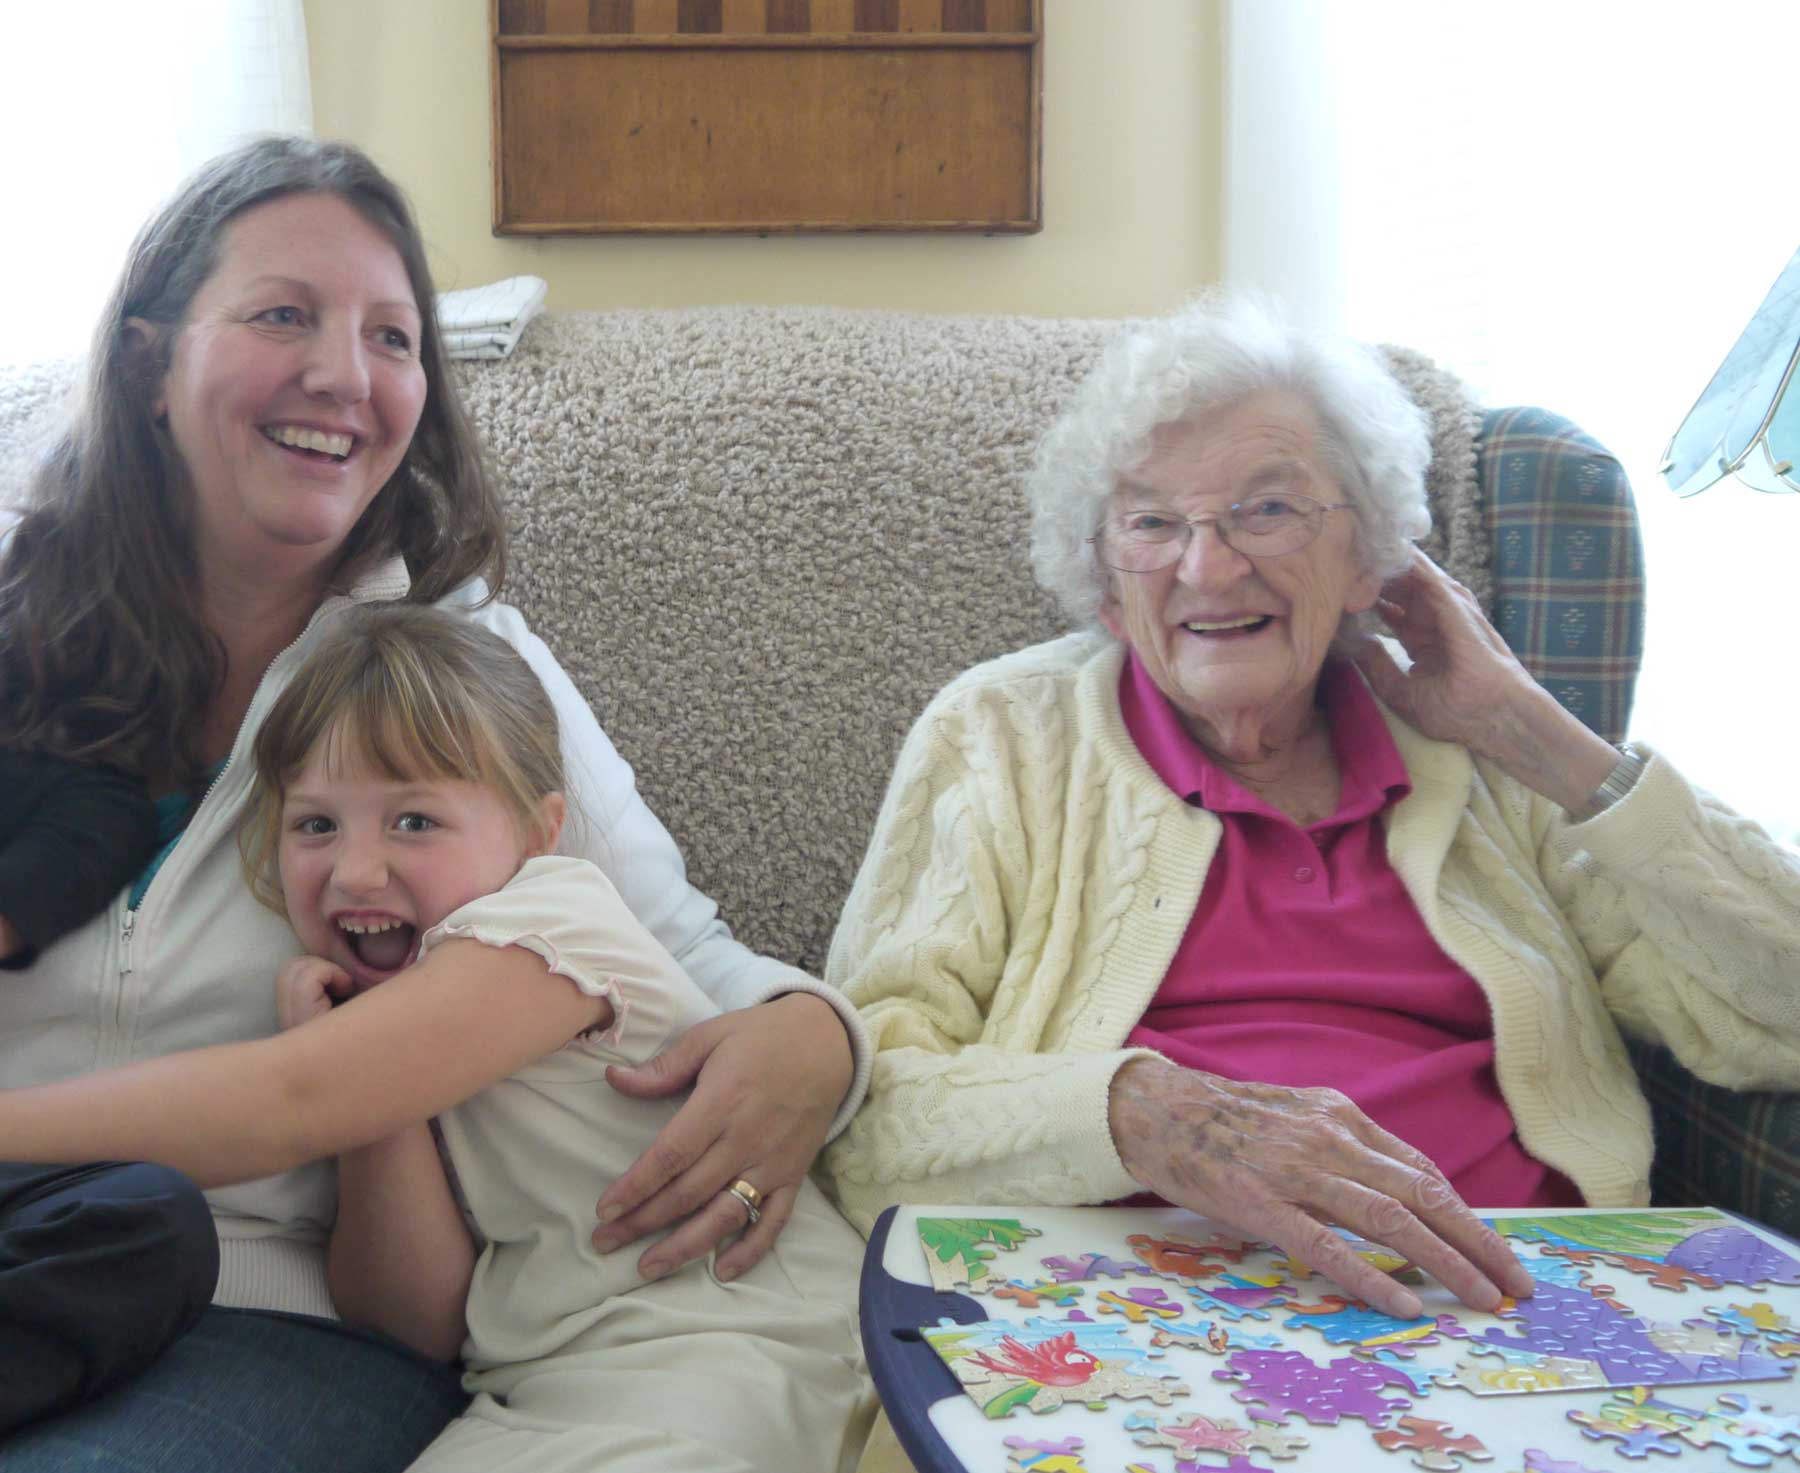 A woman with young children sits on a couch with an older woman, working on a puzzle